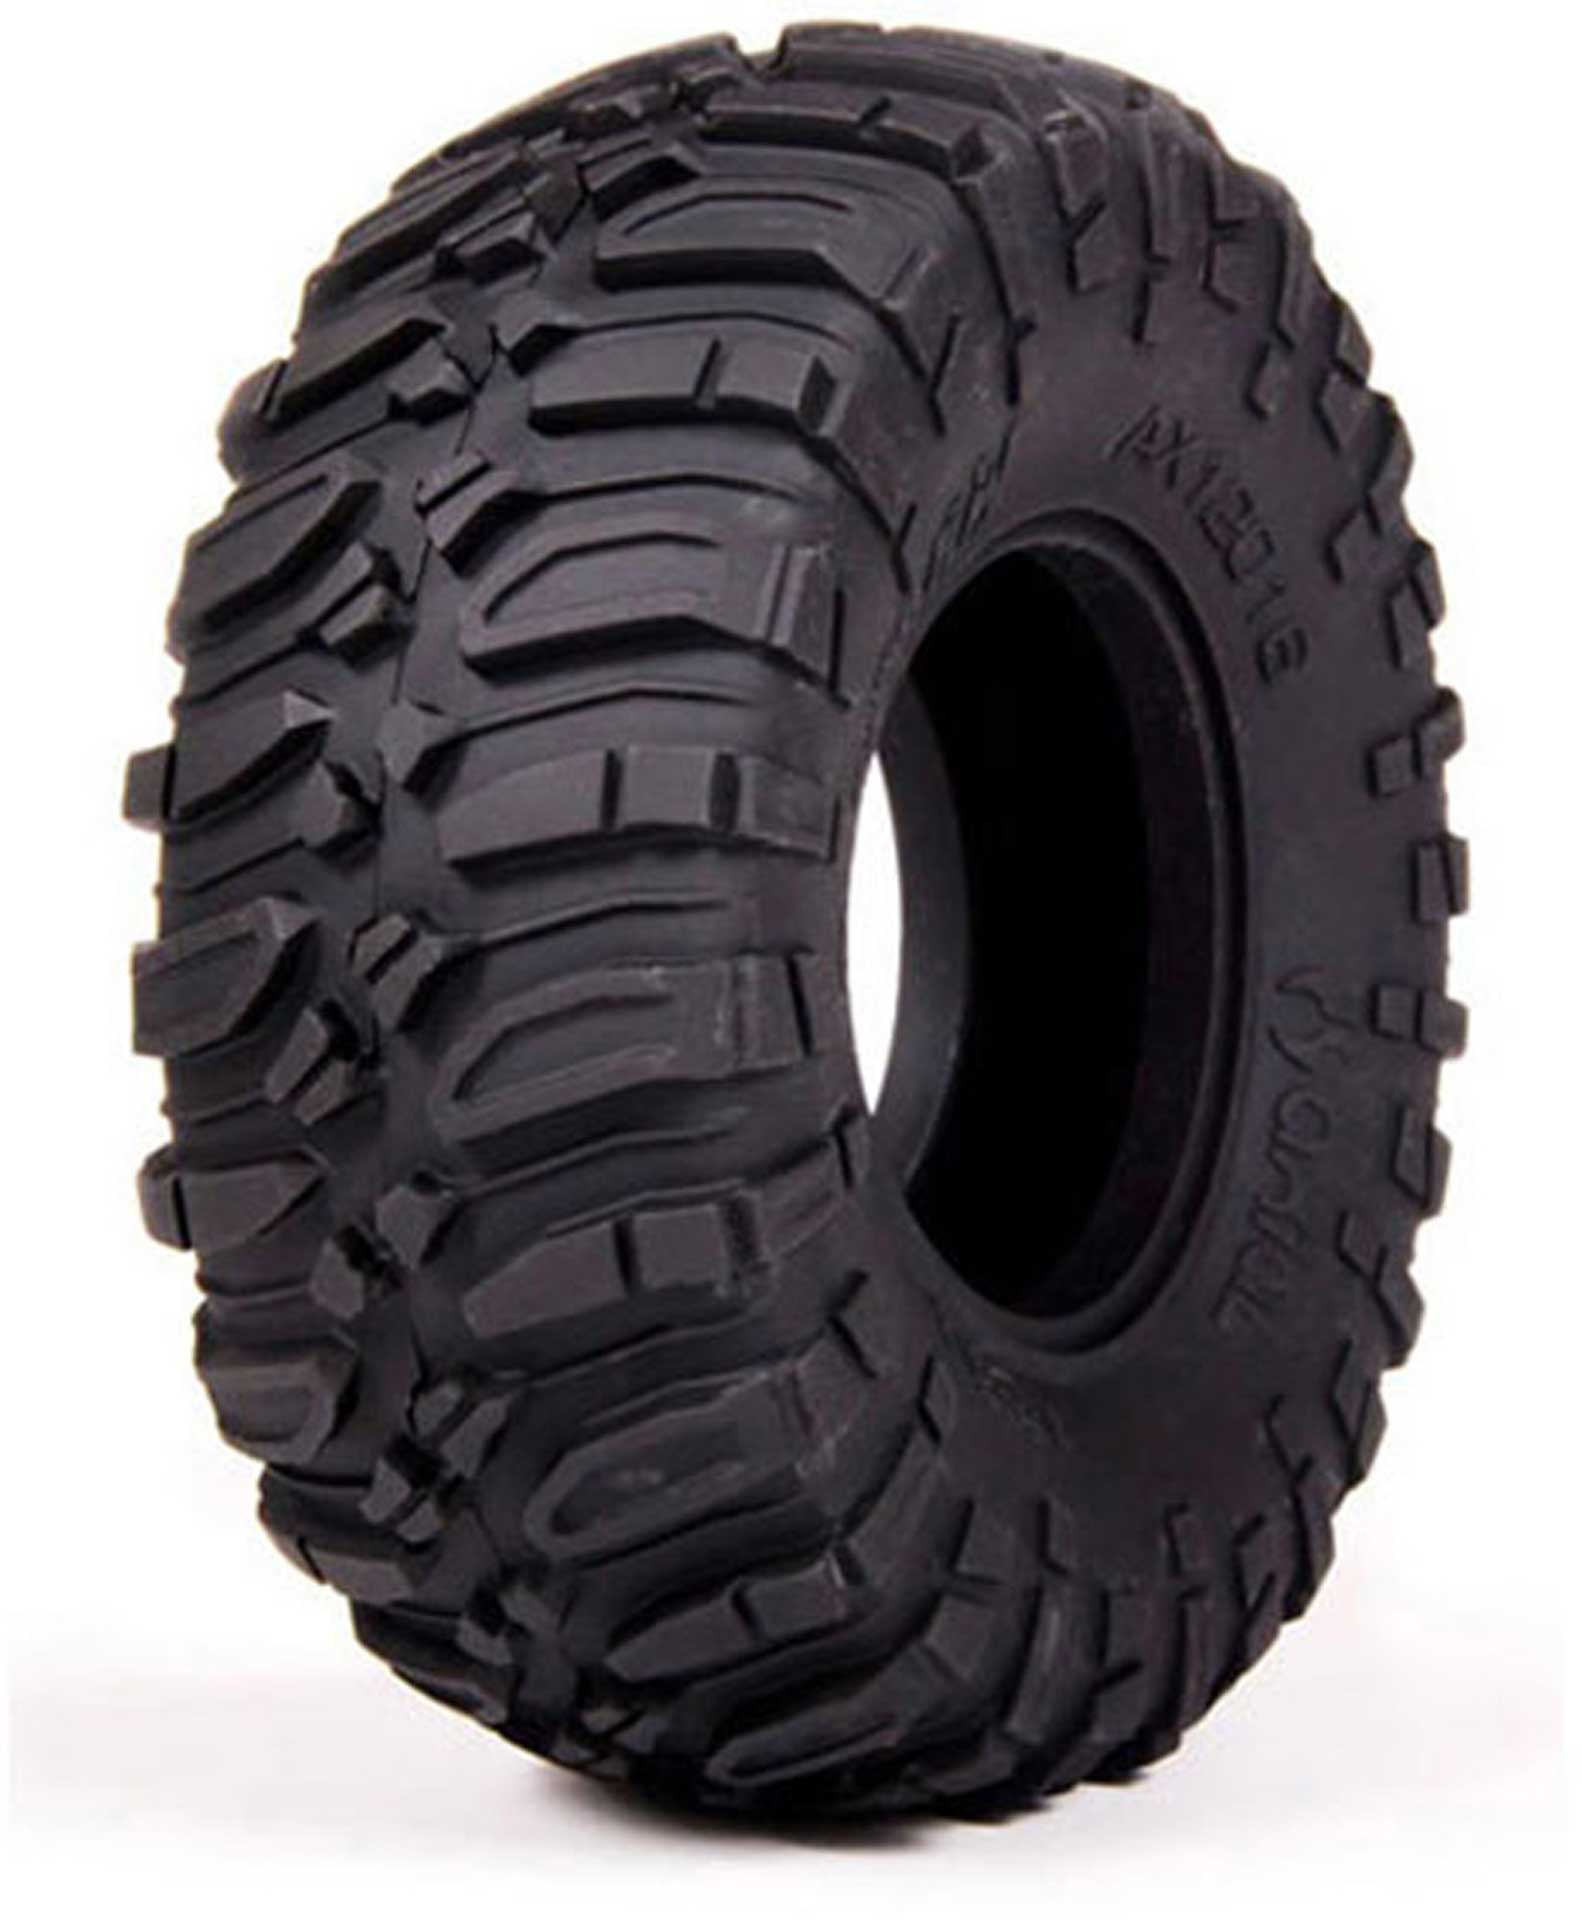 AXIAL AX12016 1.9 Ripsaw Tires R35 Compound (2)